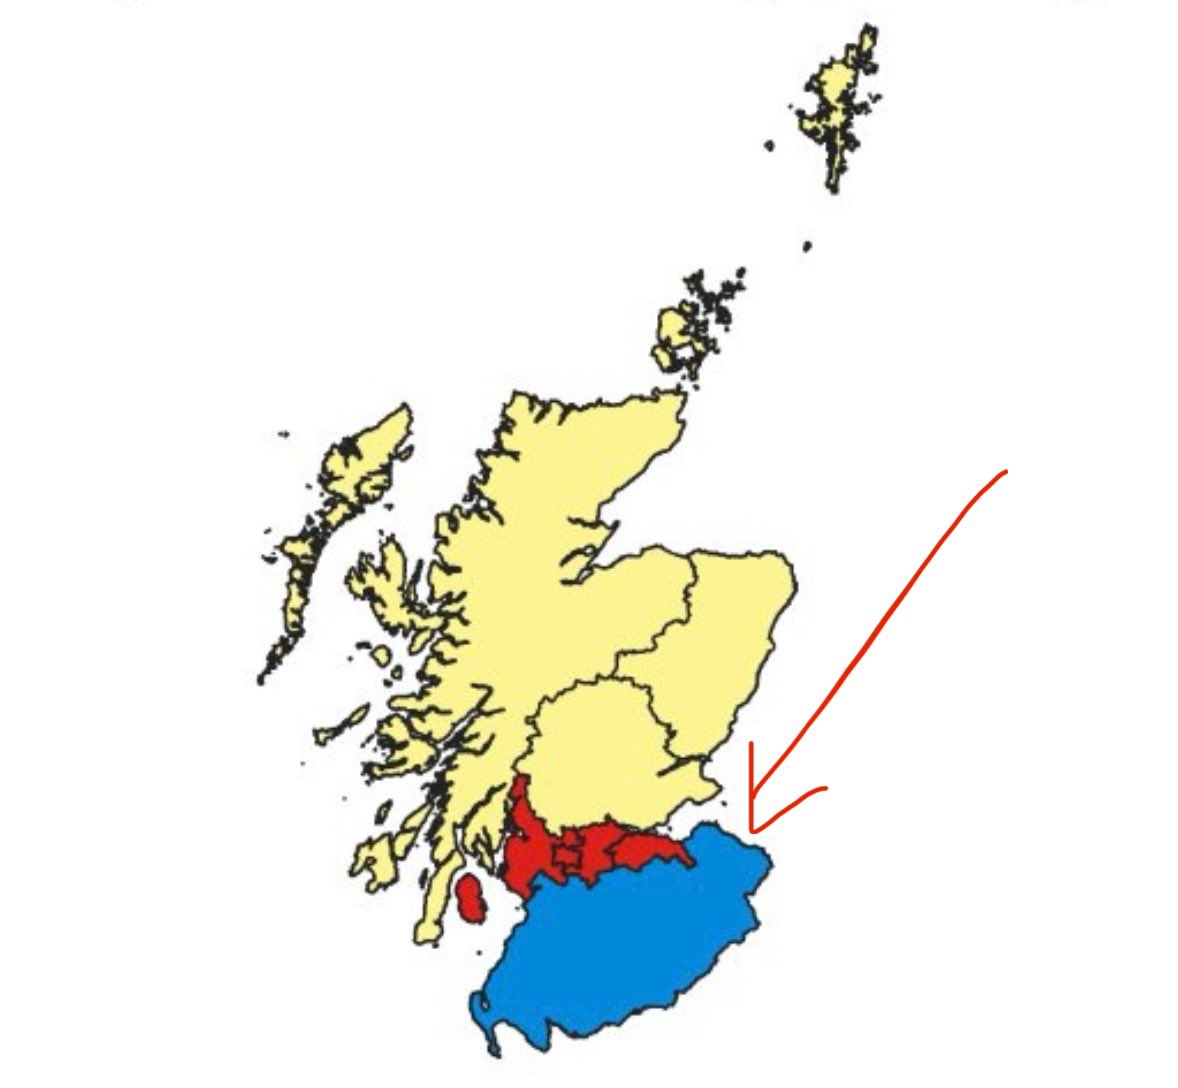 @BallotBoxScot Have you got East Lothian going Tory there?? 🤔